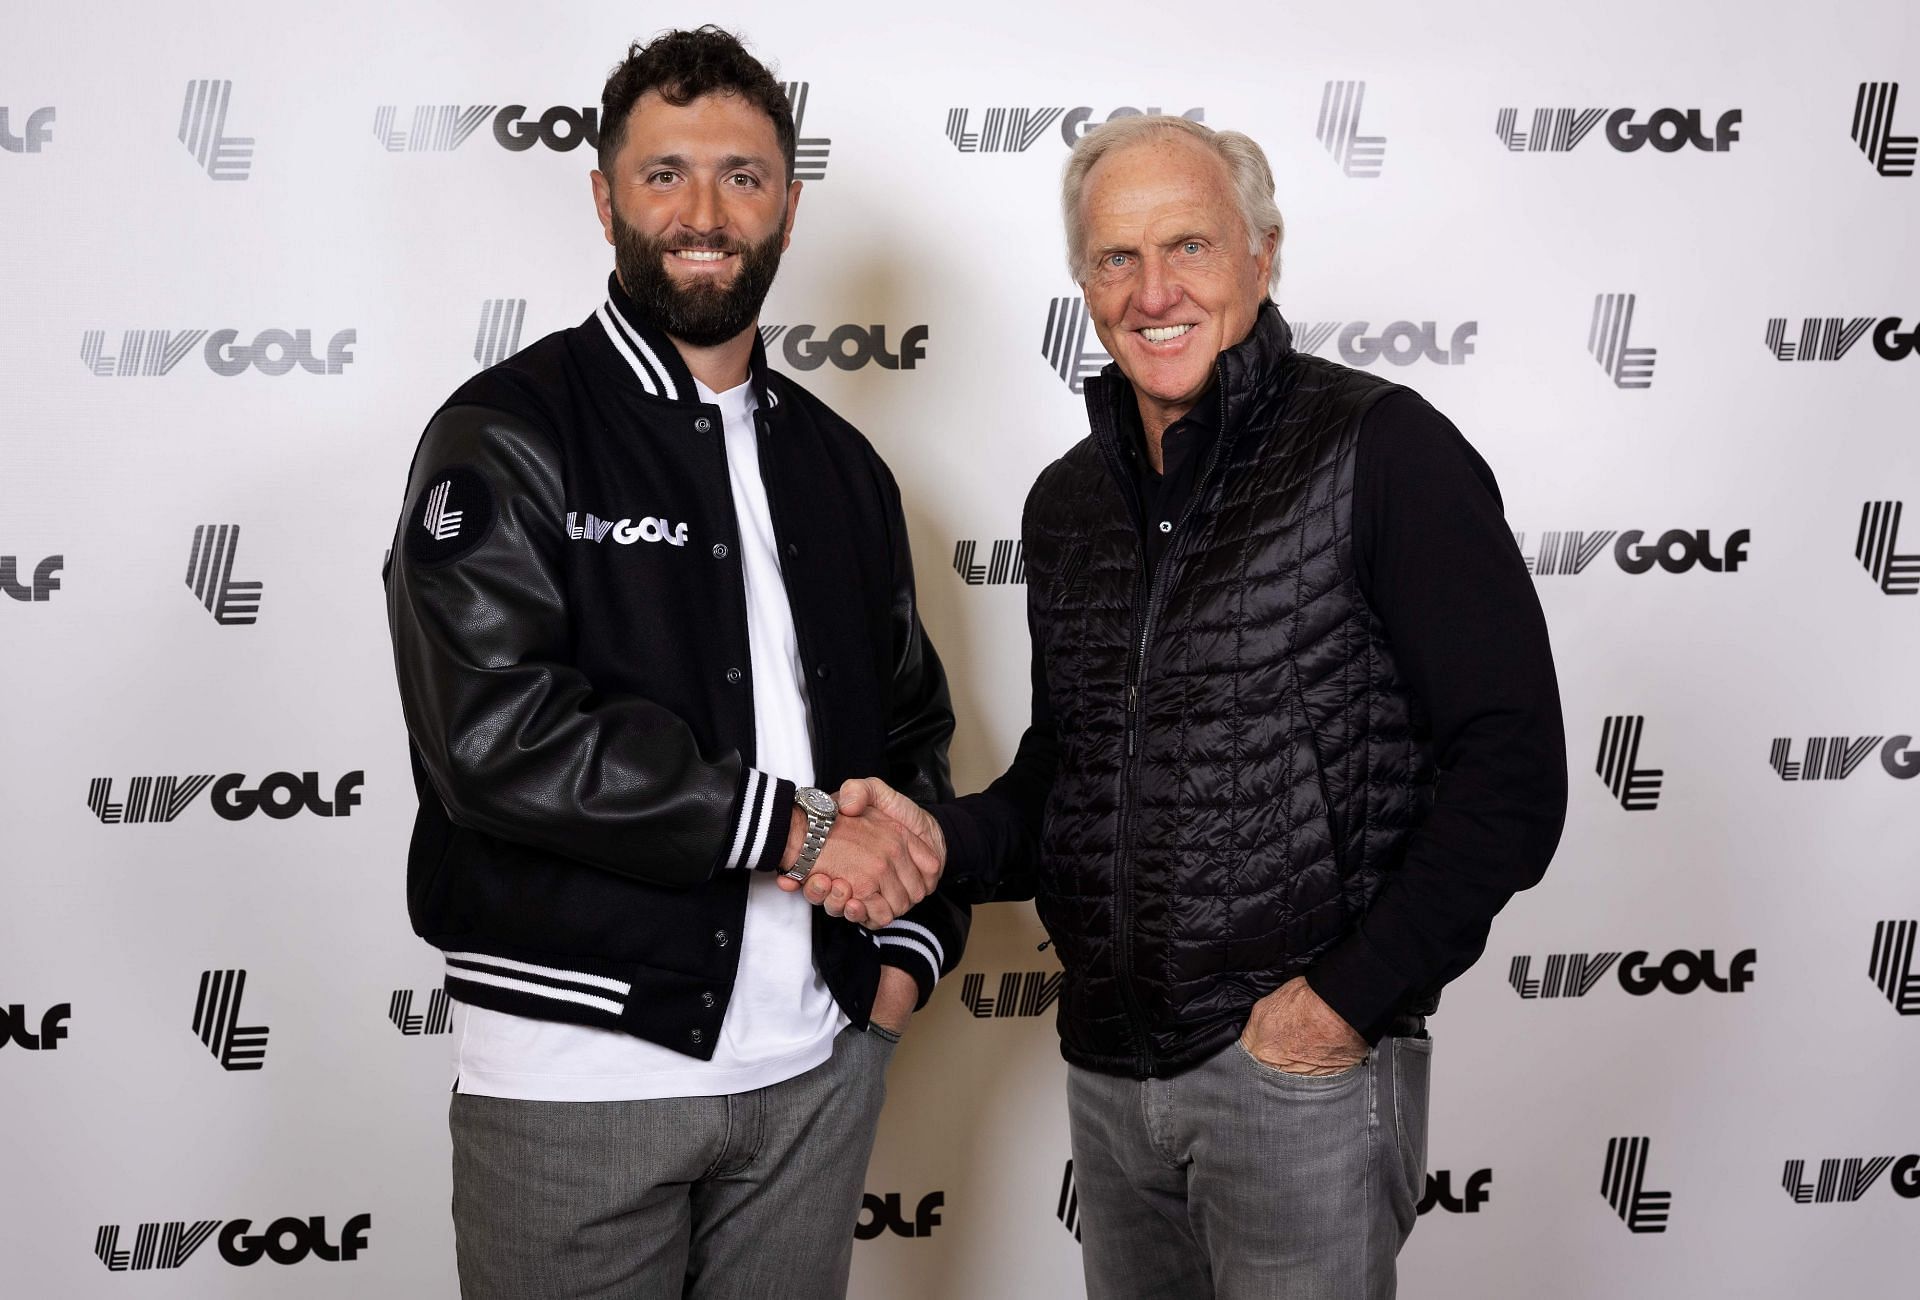 Jon Rahm announcing his signing with LIV Golf (Image via X @GolfMonthly).